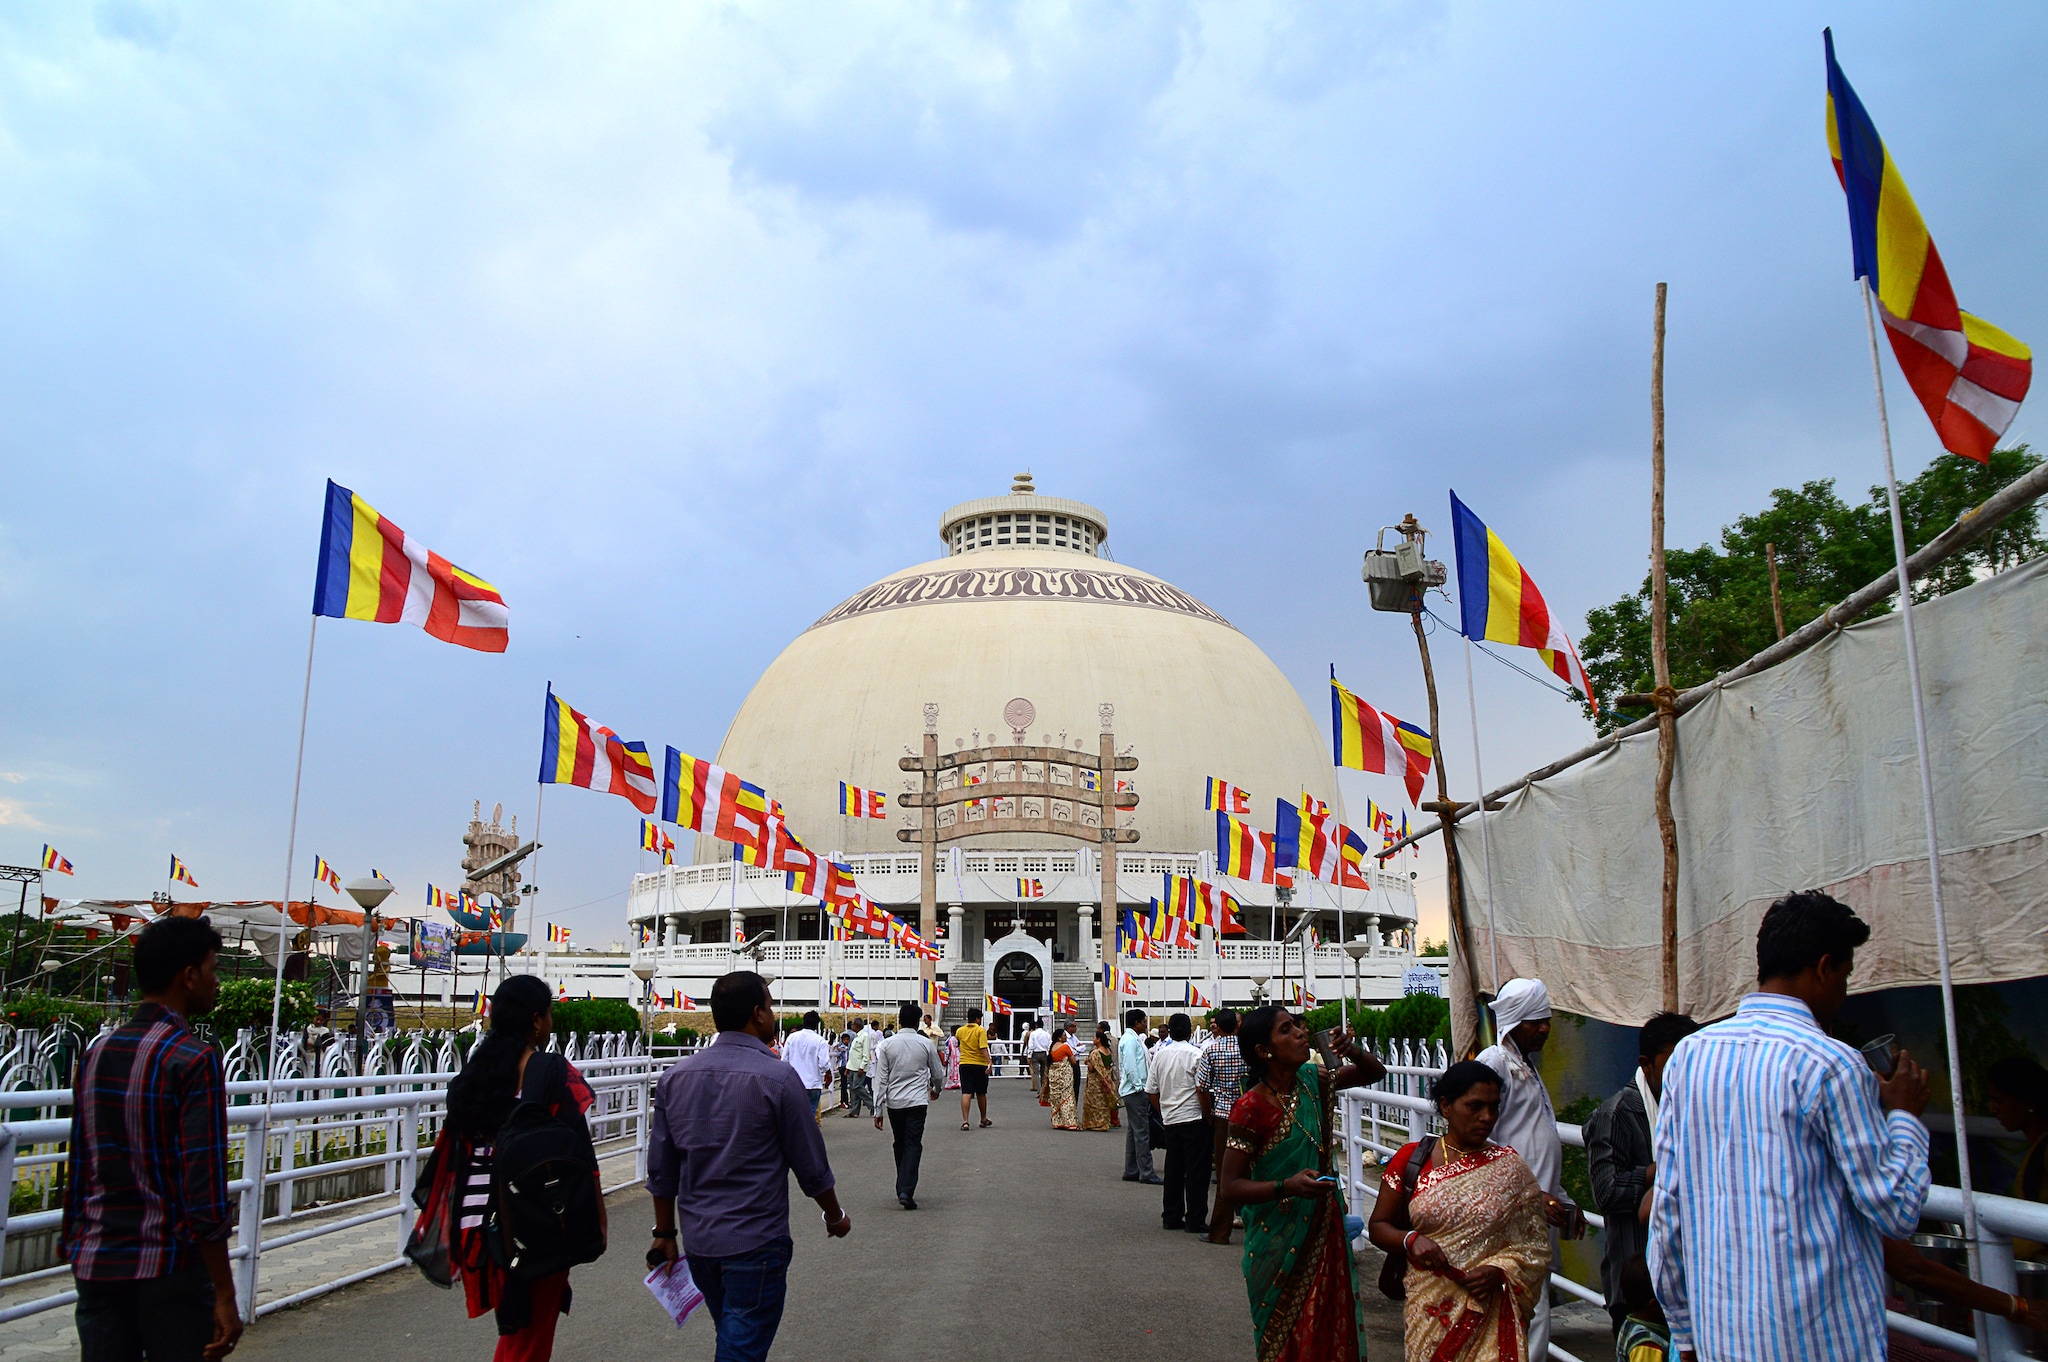 On Dhammachakra Pravartan Din, a large gathering happened at a Buddhist sacred monument in Nagpur called Deekshabhoomi where Dr Ambedkar and his followers embraced Buddhism. (Image: Shutterstock)